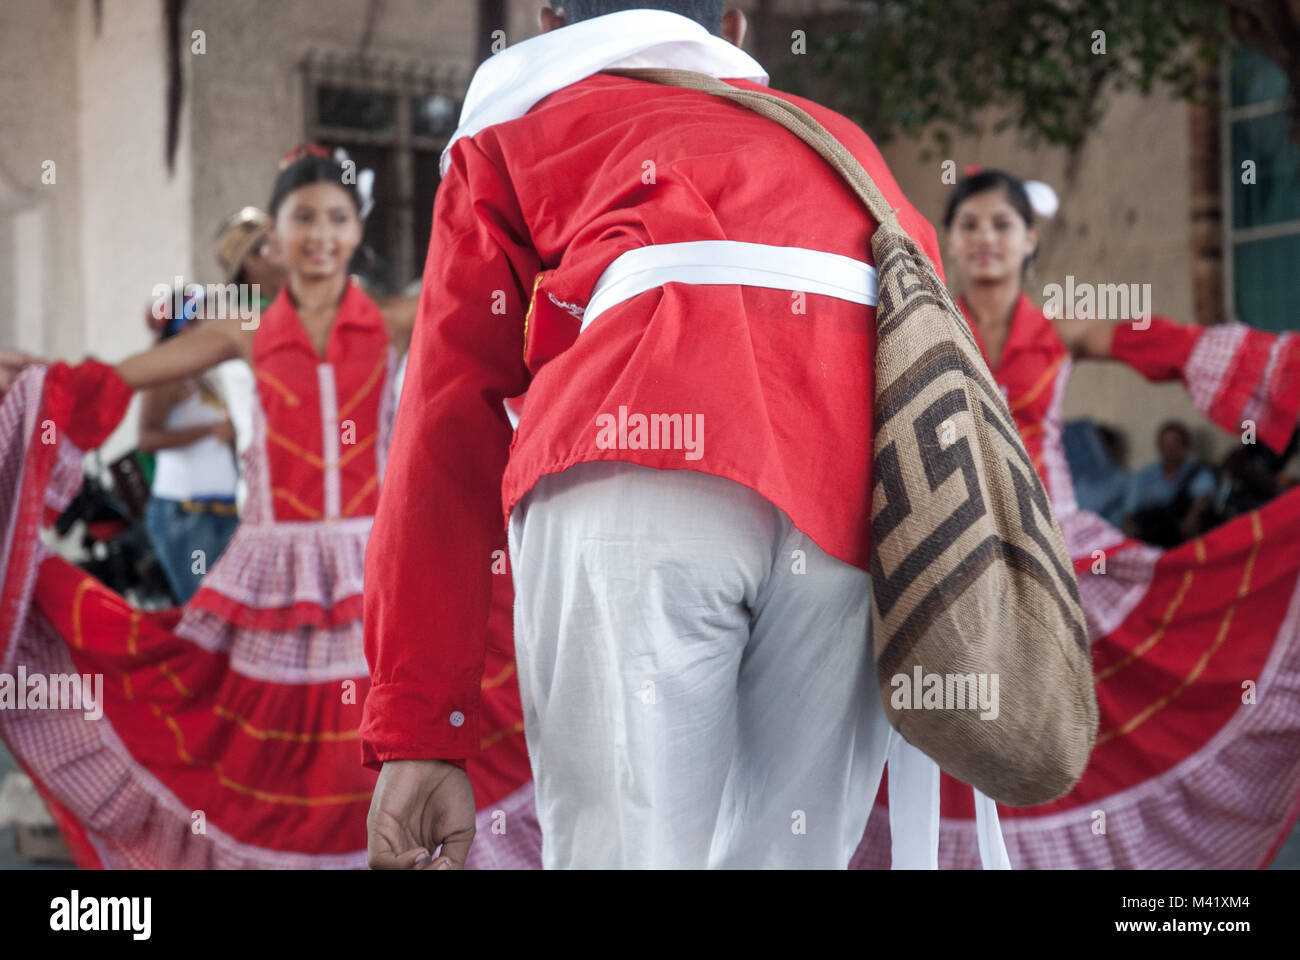 A man wearing traditional red and white clothing dancing with two women wearing dresses at Barranquilla Carnival Stock Photo